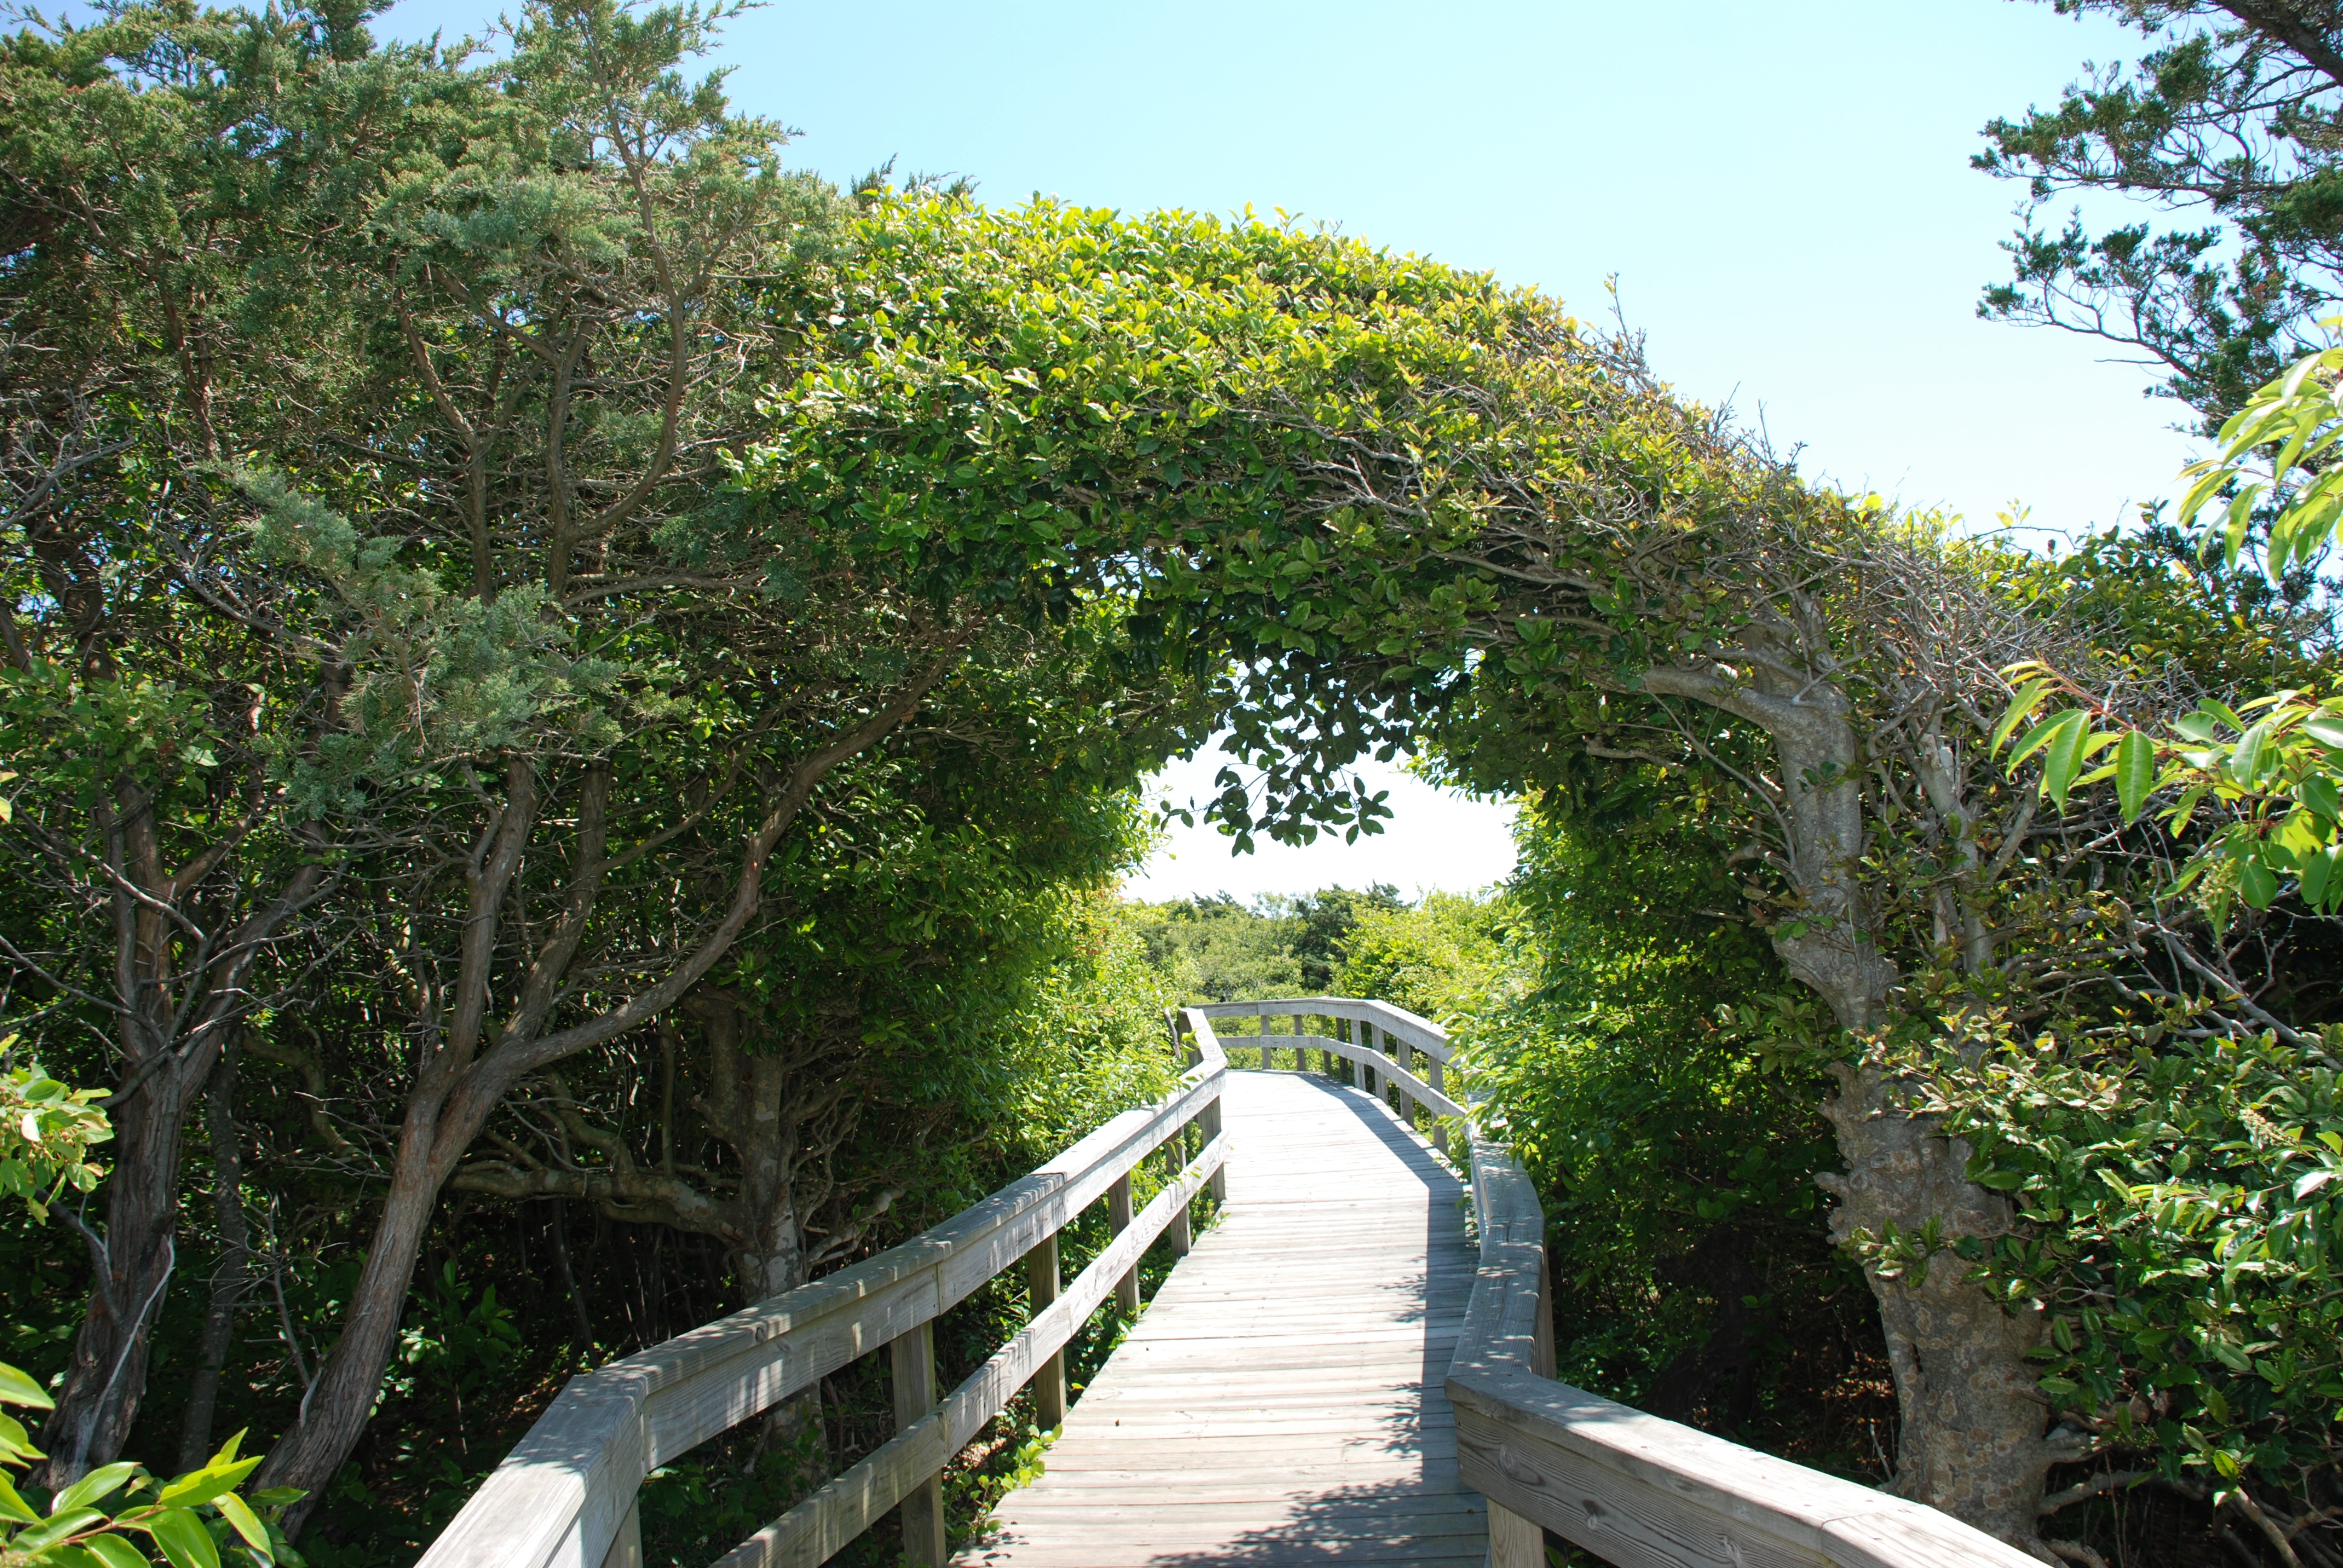 Image of Fire Island's Sunken Forest Trail. Tree creating an arch over the wooden pathway.